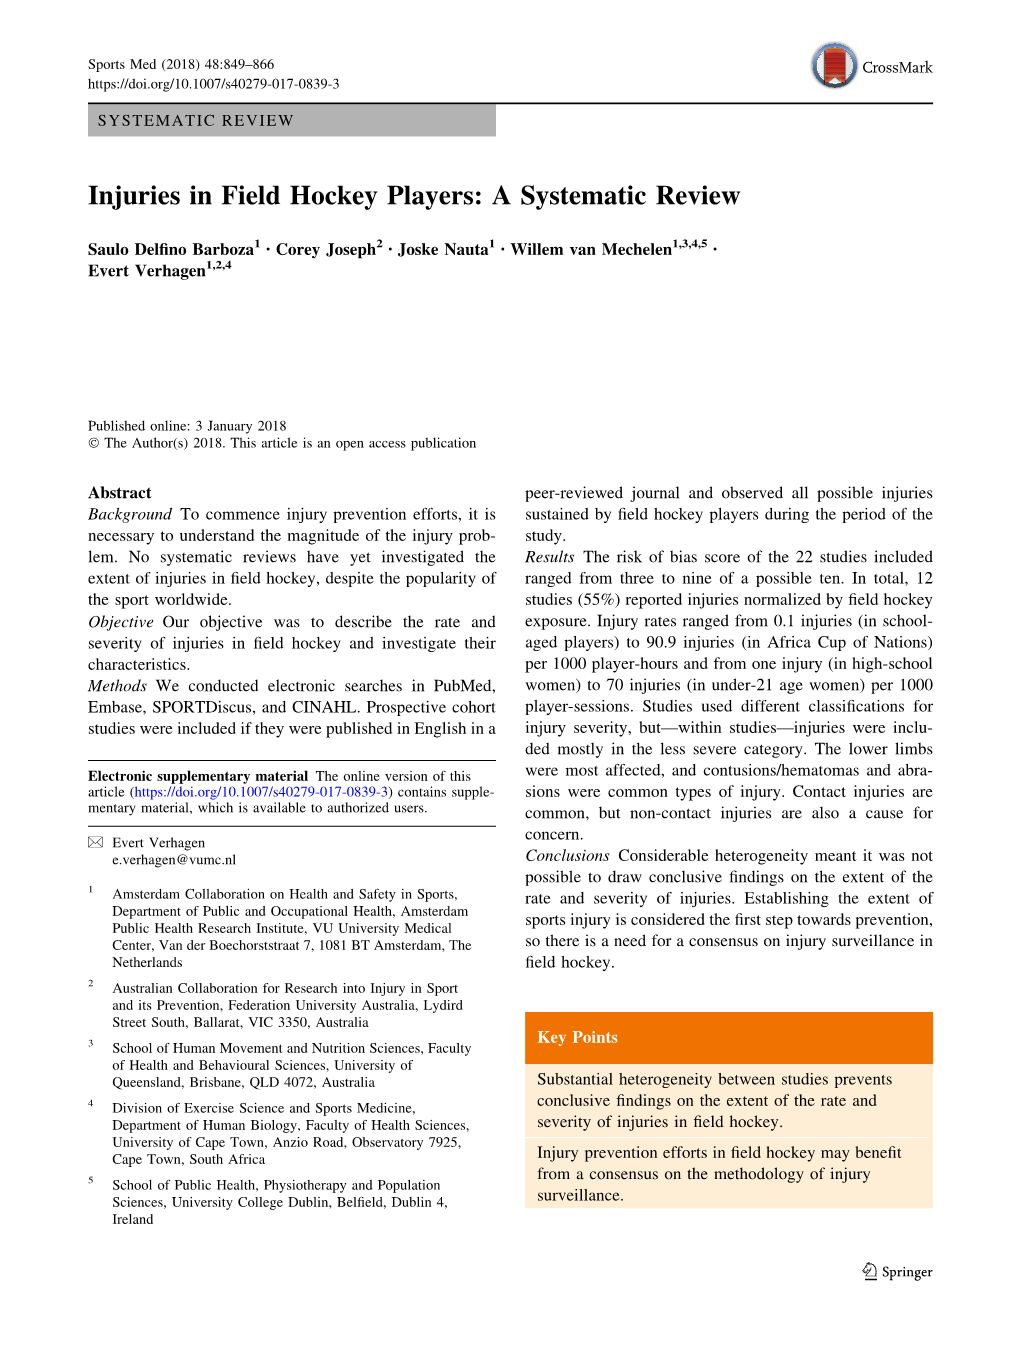 Injuries in Field Hockey Players: a Systematic Review